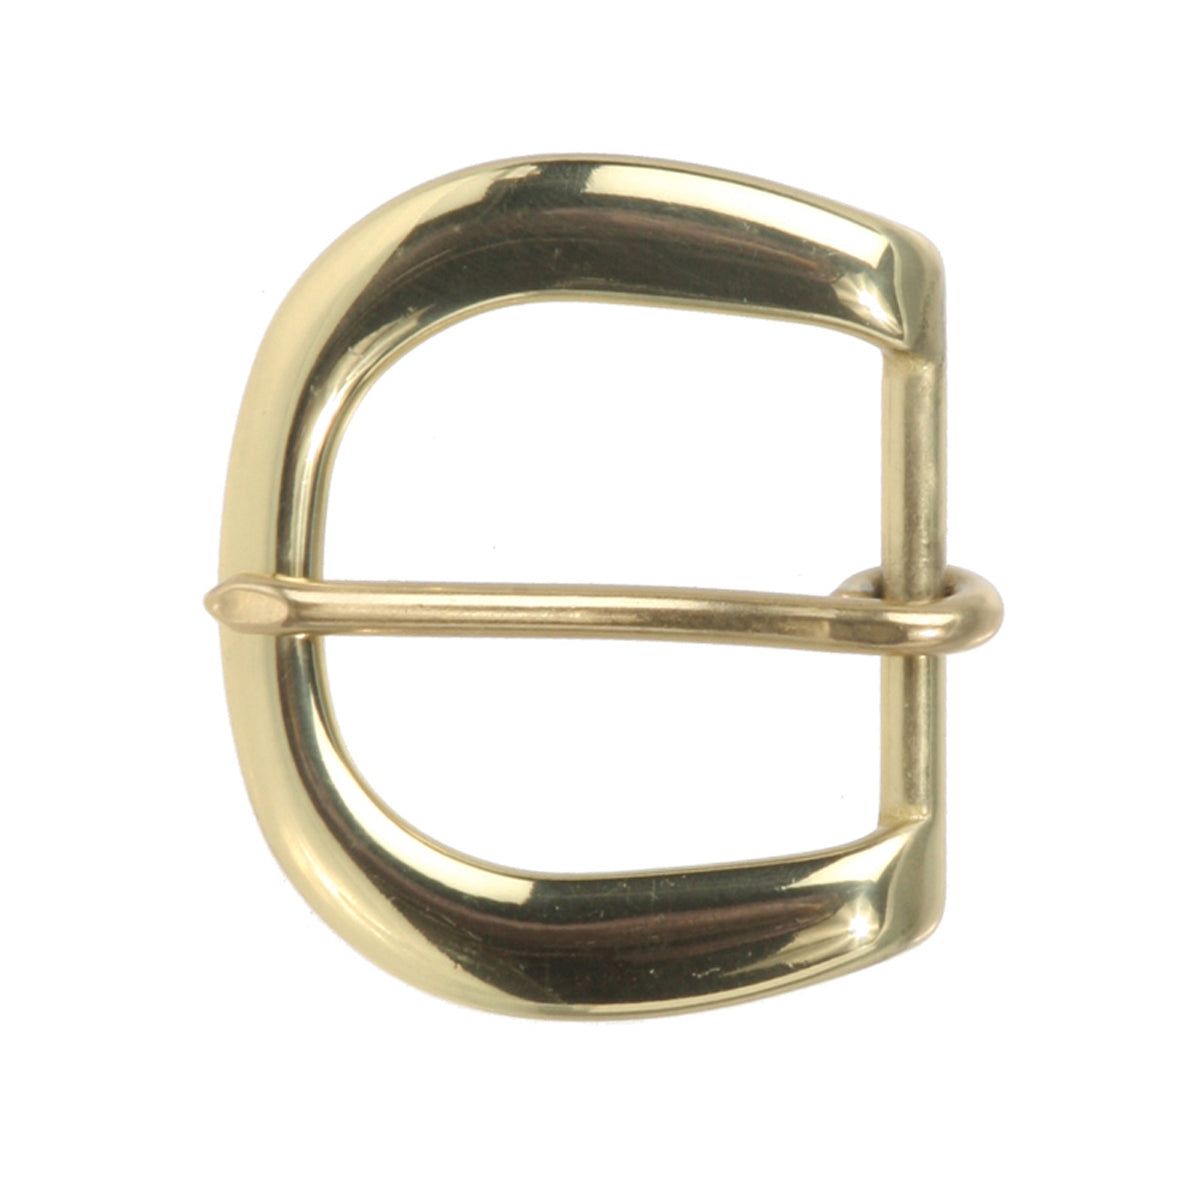 1 1/4 Inch Single Prong Round Solid Brass Belt Buckle